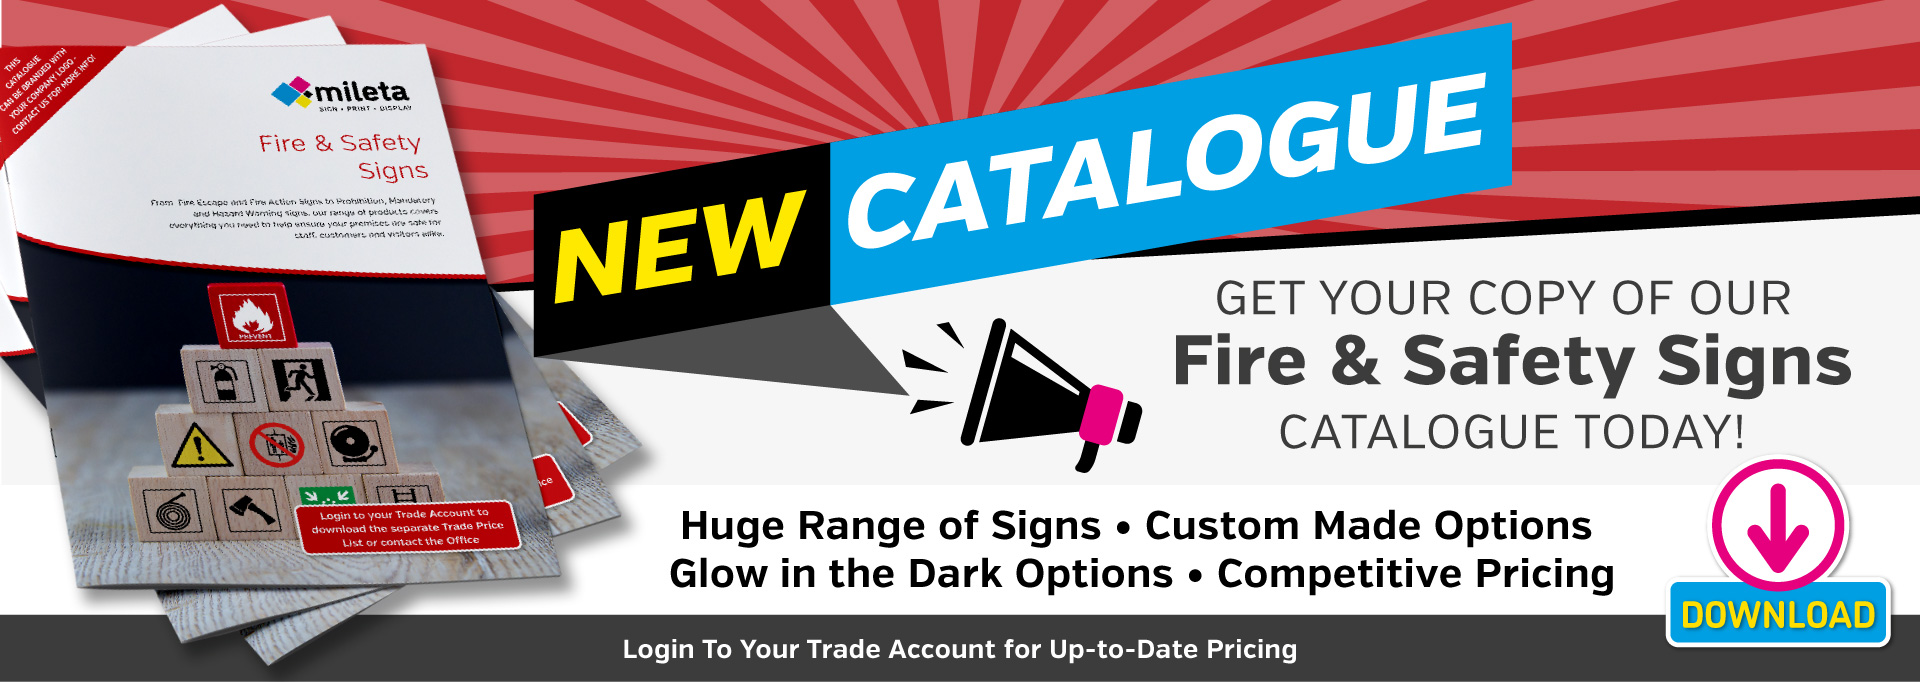 Fire & Safety Signs Catalogue